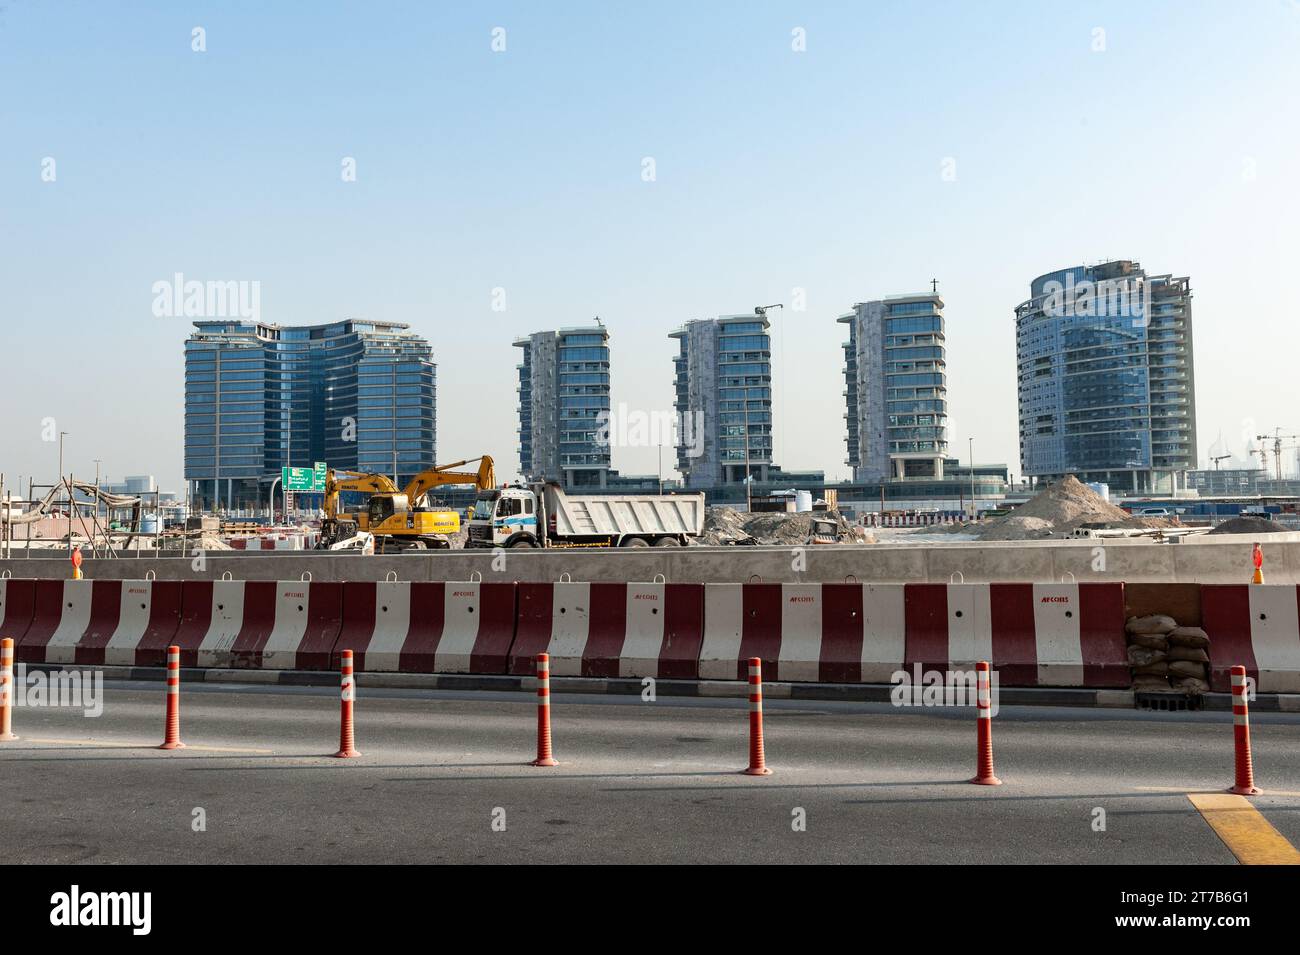 Dubai, United Arab Emirates. June 28th 2019. Highway construction work and modern apartment buildings being built in Dubai, United Arab Emirates, Midd Stock Photo